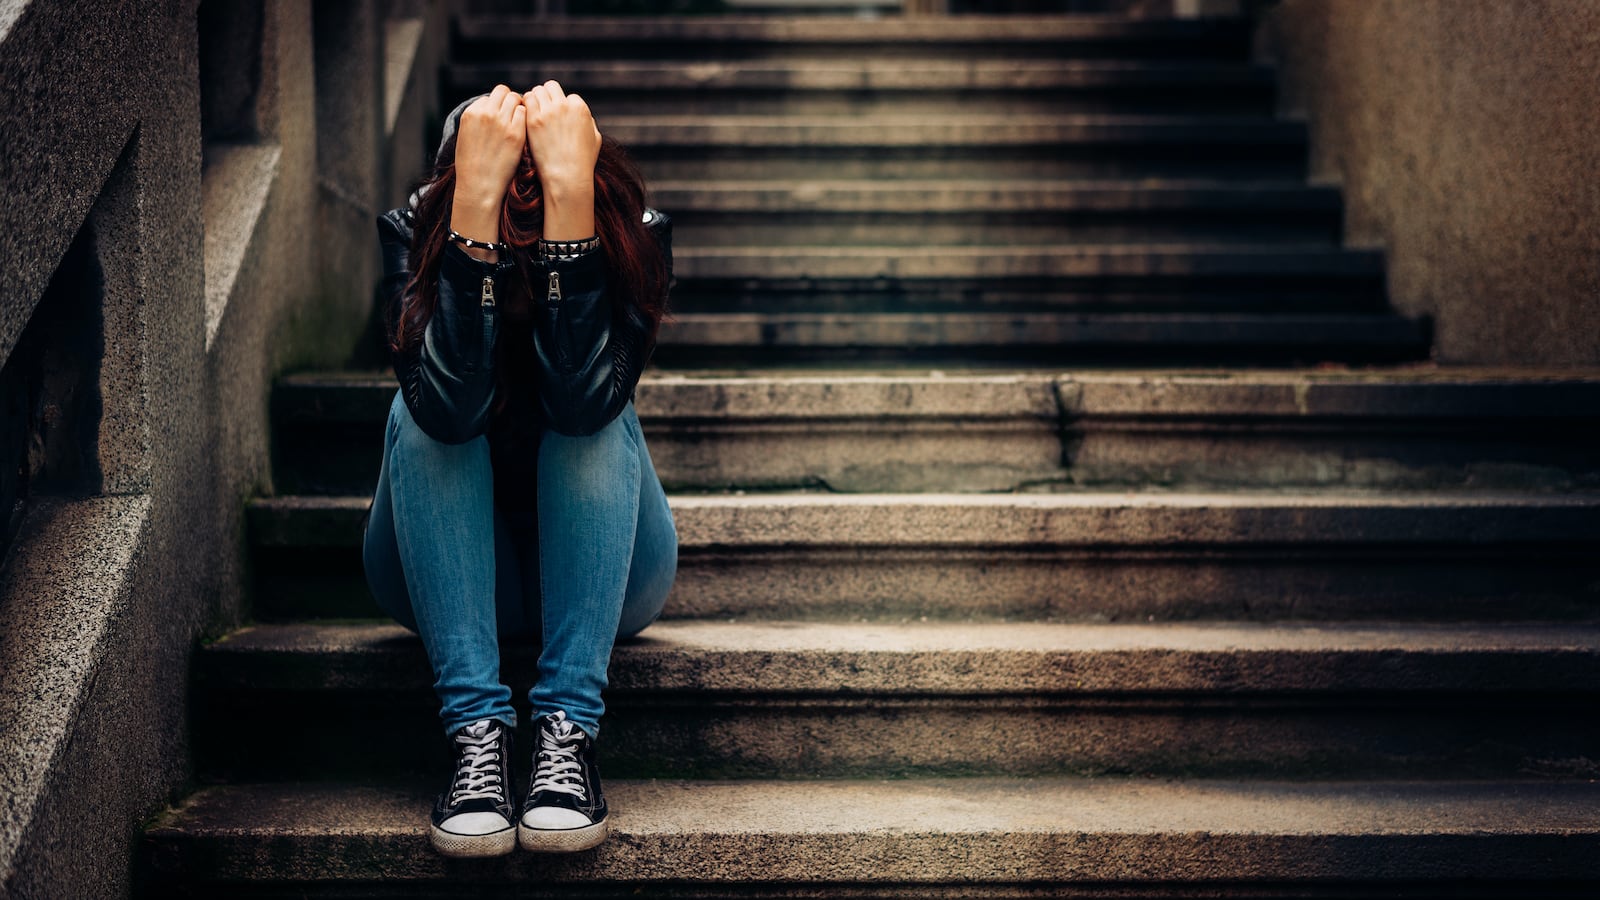 A young person wearing jeans and Converse-style shoes sits on concrete steps holding their head in their hands